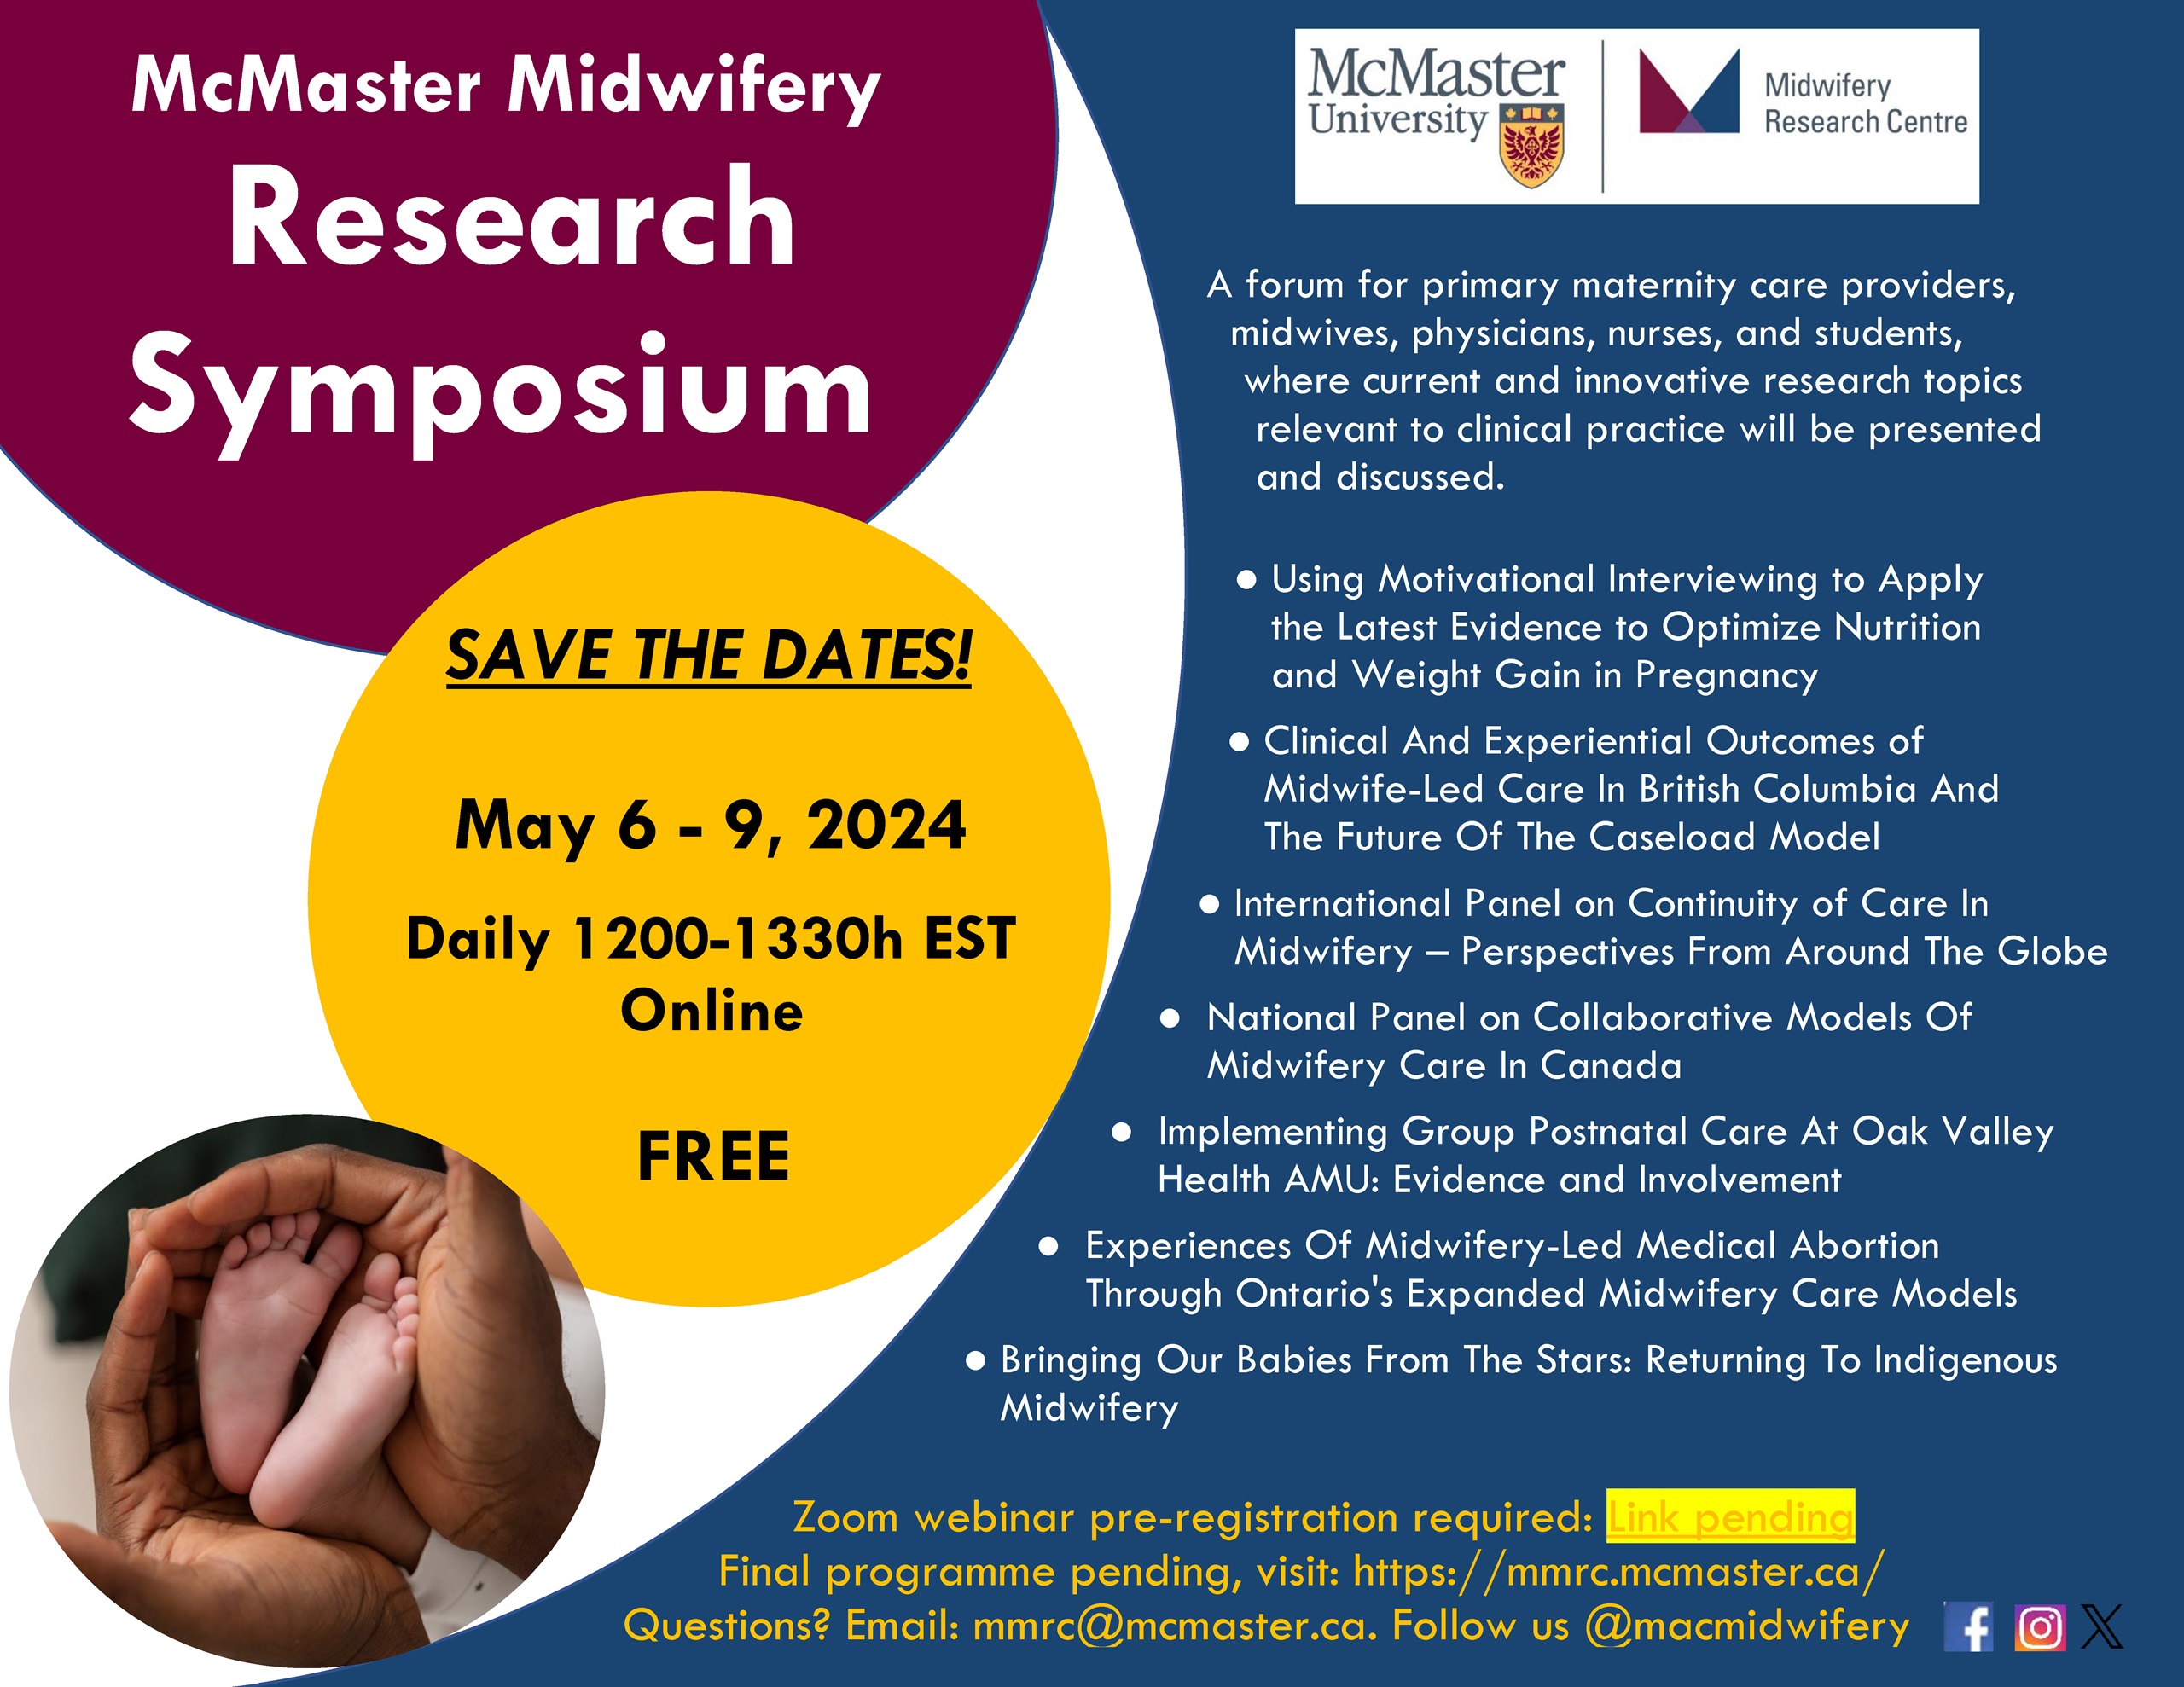 Save the Dates - MMRC Midwifery Research Symposium May 6-9, 2024!